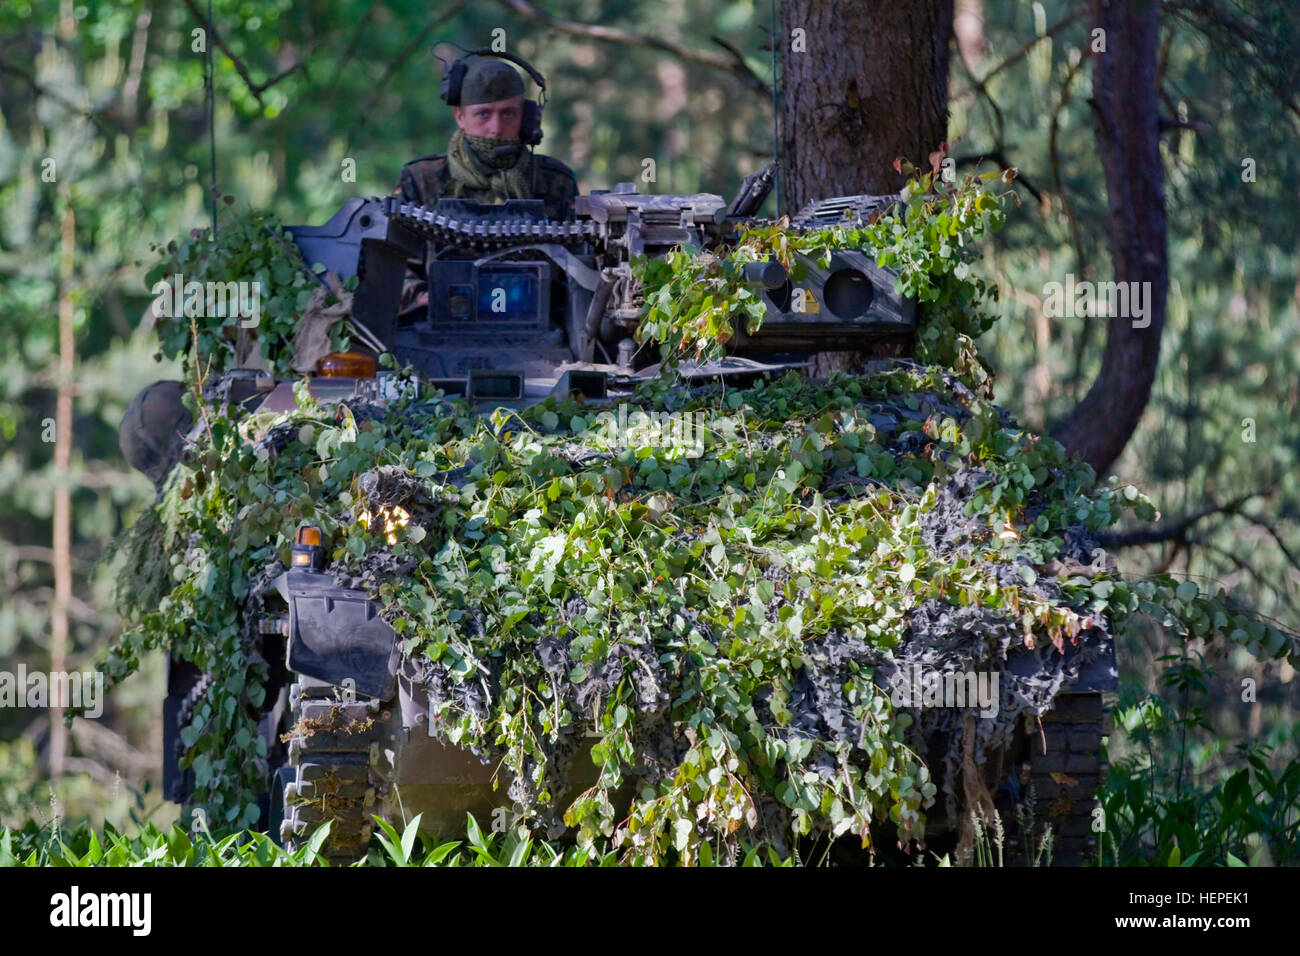 German Army Staff Sgt. Jonathan Lucke, a native of Stuttgart, assigned to 5th Company, Jager Battalion 292, sits in his camouflaged Wiesel A2 track vehicle and observes the surrounding area for enemy threats during the second day of multinational training at the Great Lithuanian Hetman Jonusas Radvila Training Regiment, in Rukla, Lithuania, June 11, 2015. The training is part of a larger exercise being conducted throughout the Baltic States called Saber Strike 2015. Saber Strike is a long-standing U.S. Army Europe-led cooperative training exercise. This year’s exercise objectives facilitate co Stock Photo